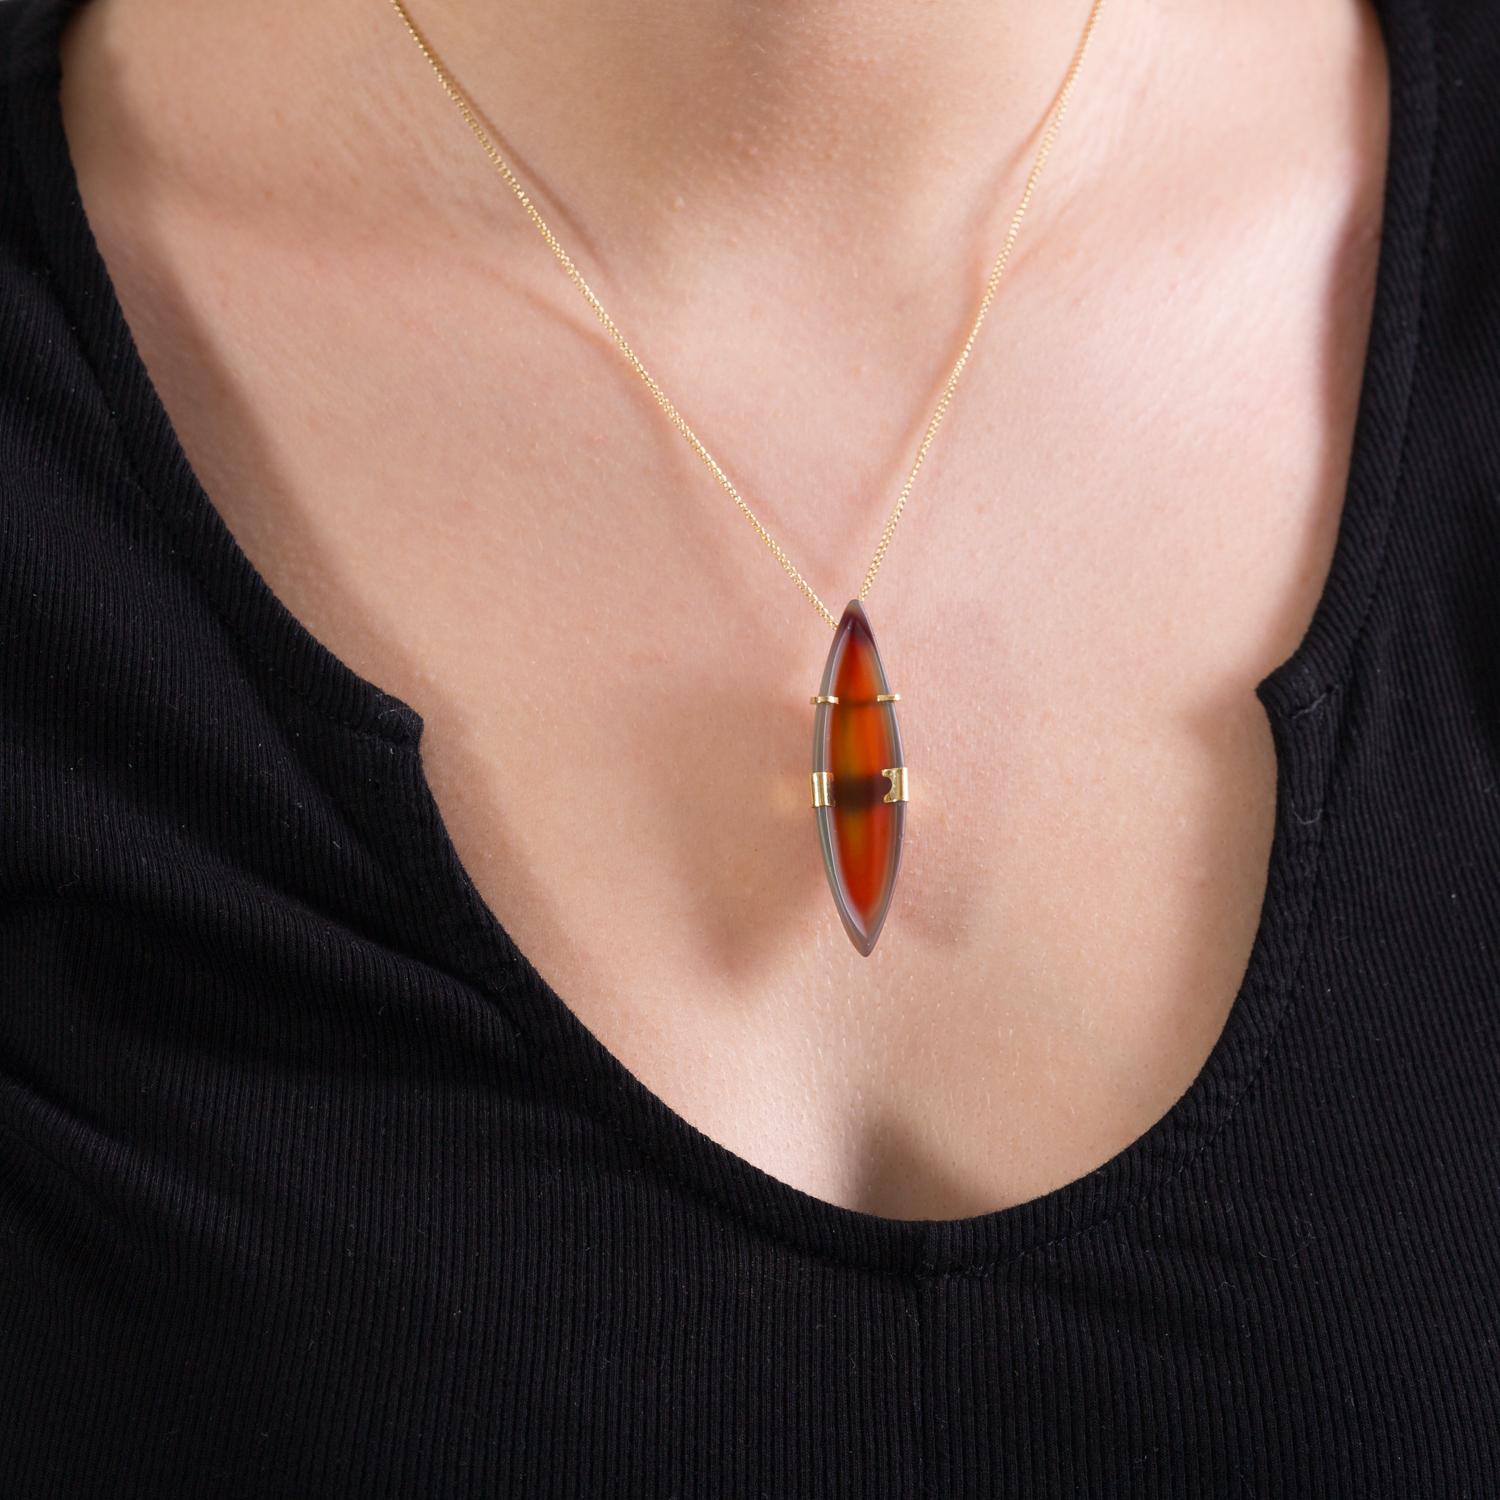 This one of a kind jewel is hand carved from an unusual amber and delicate green coloured Agate stone, formed into a soft boat shape, (carved by acclaimed lapidary artist Dieter Lorenz). Set in a minimalist 18 Karat gold setting to mirror the sleek